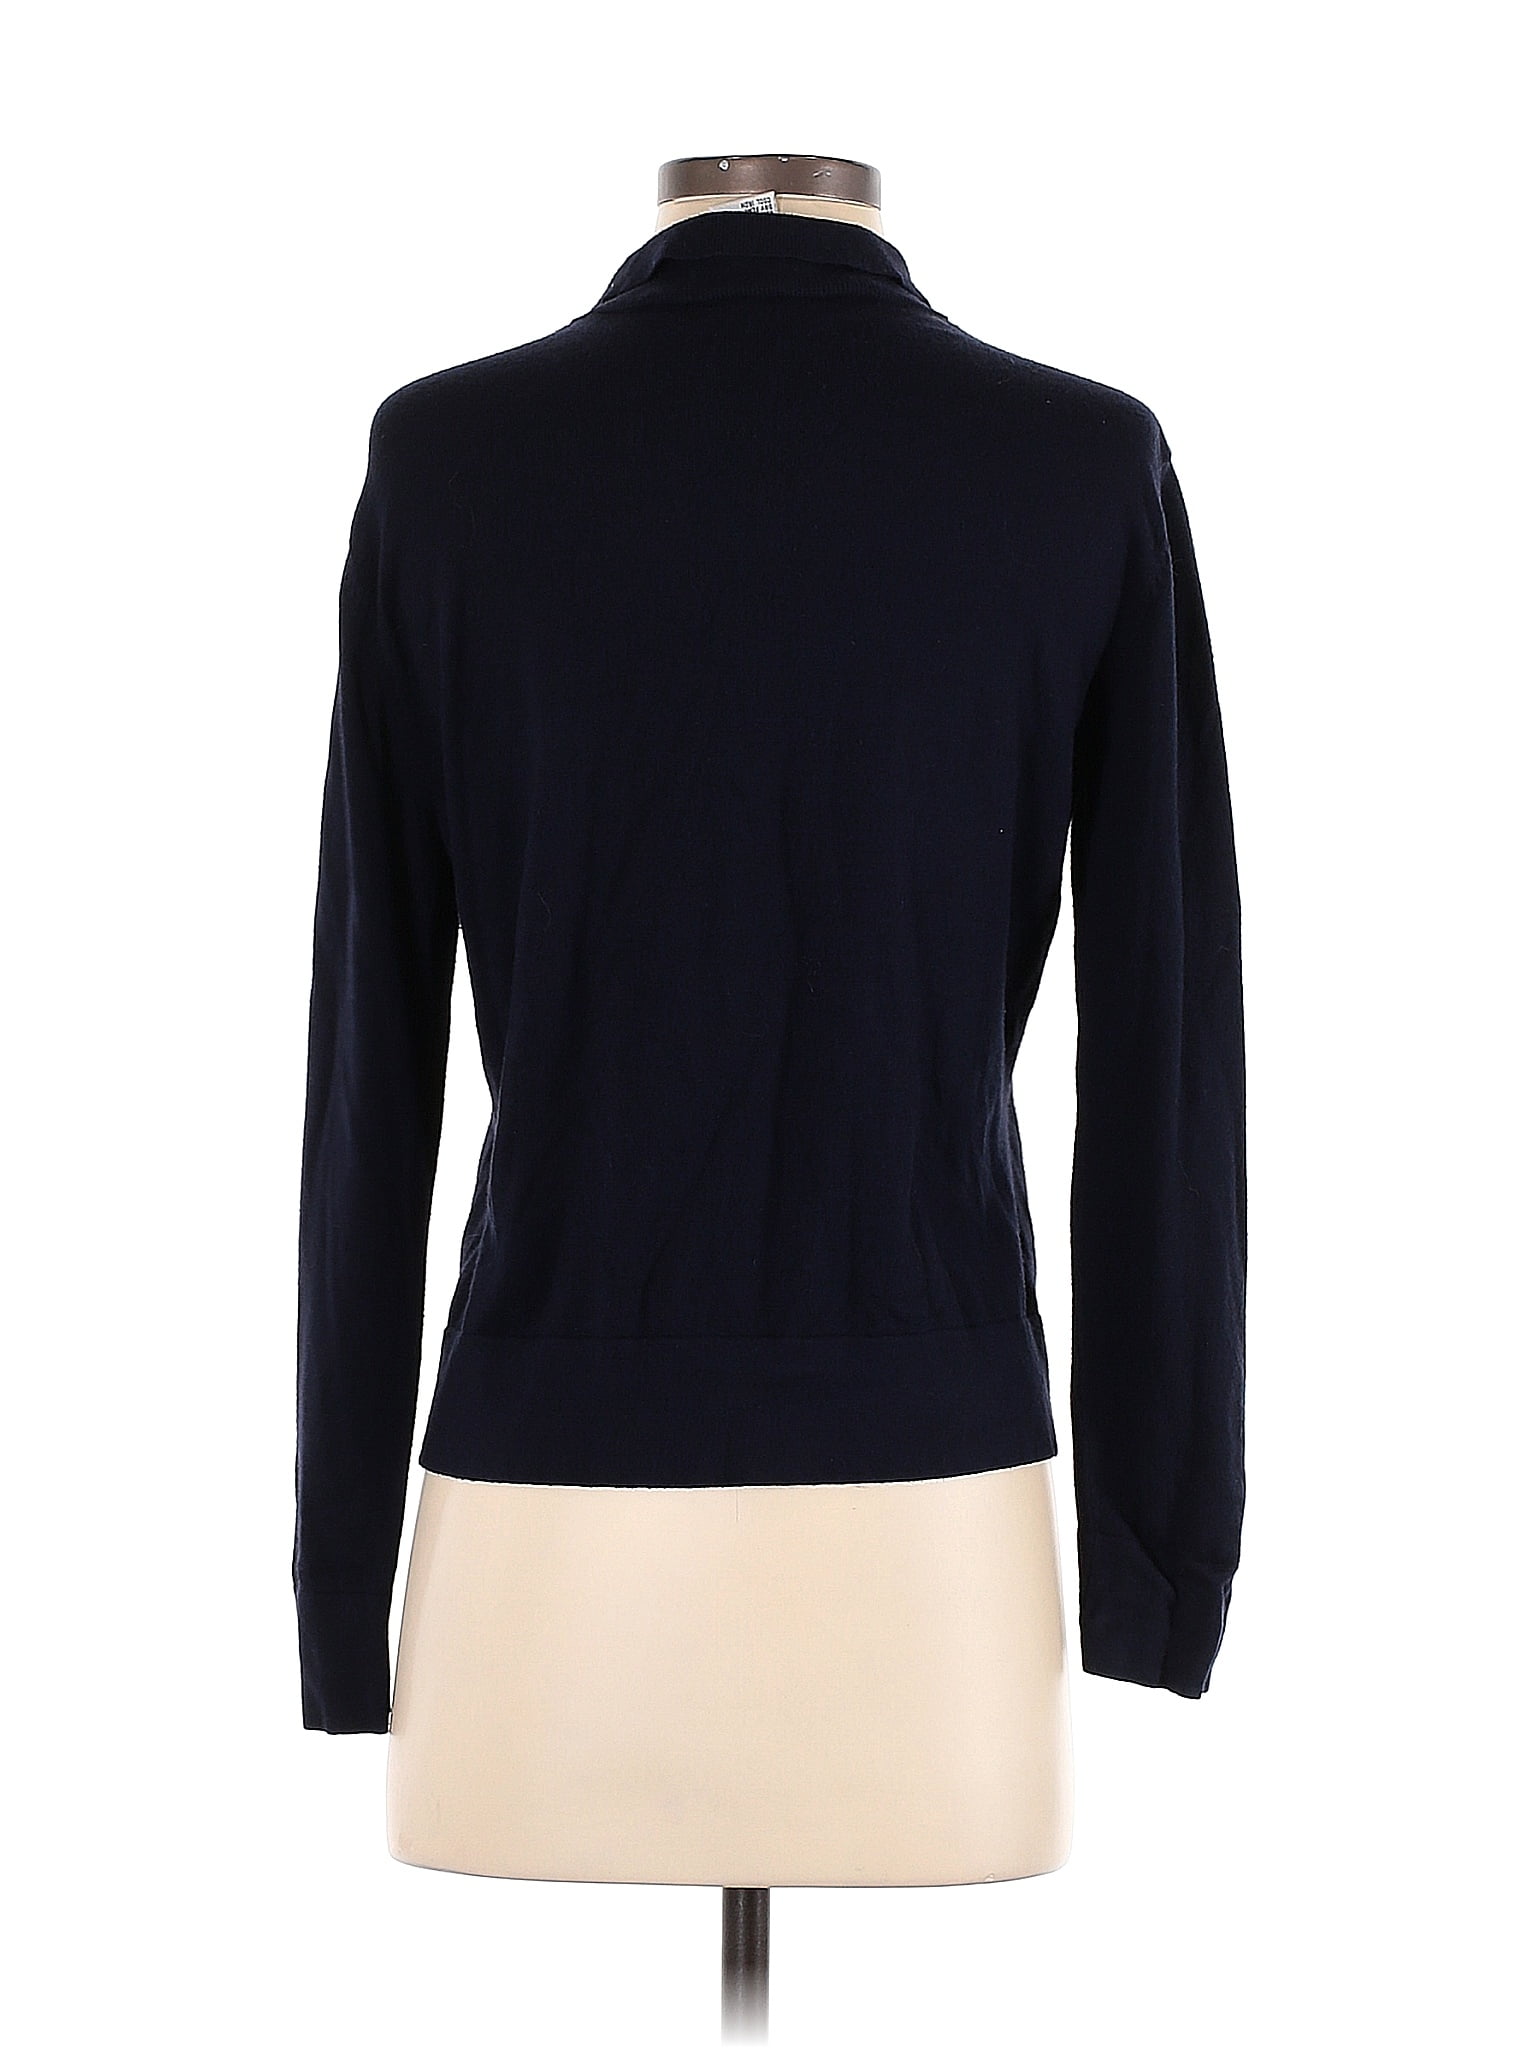 J.Jill Color Block Solid Navy Blue Pullover Sweater Size XS (Petite) - 68%  off